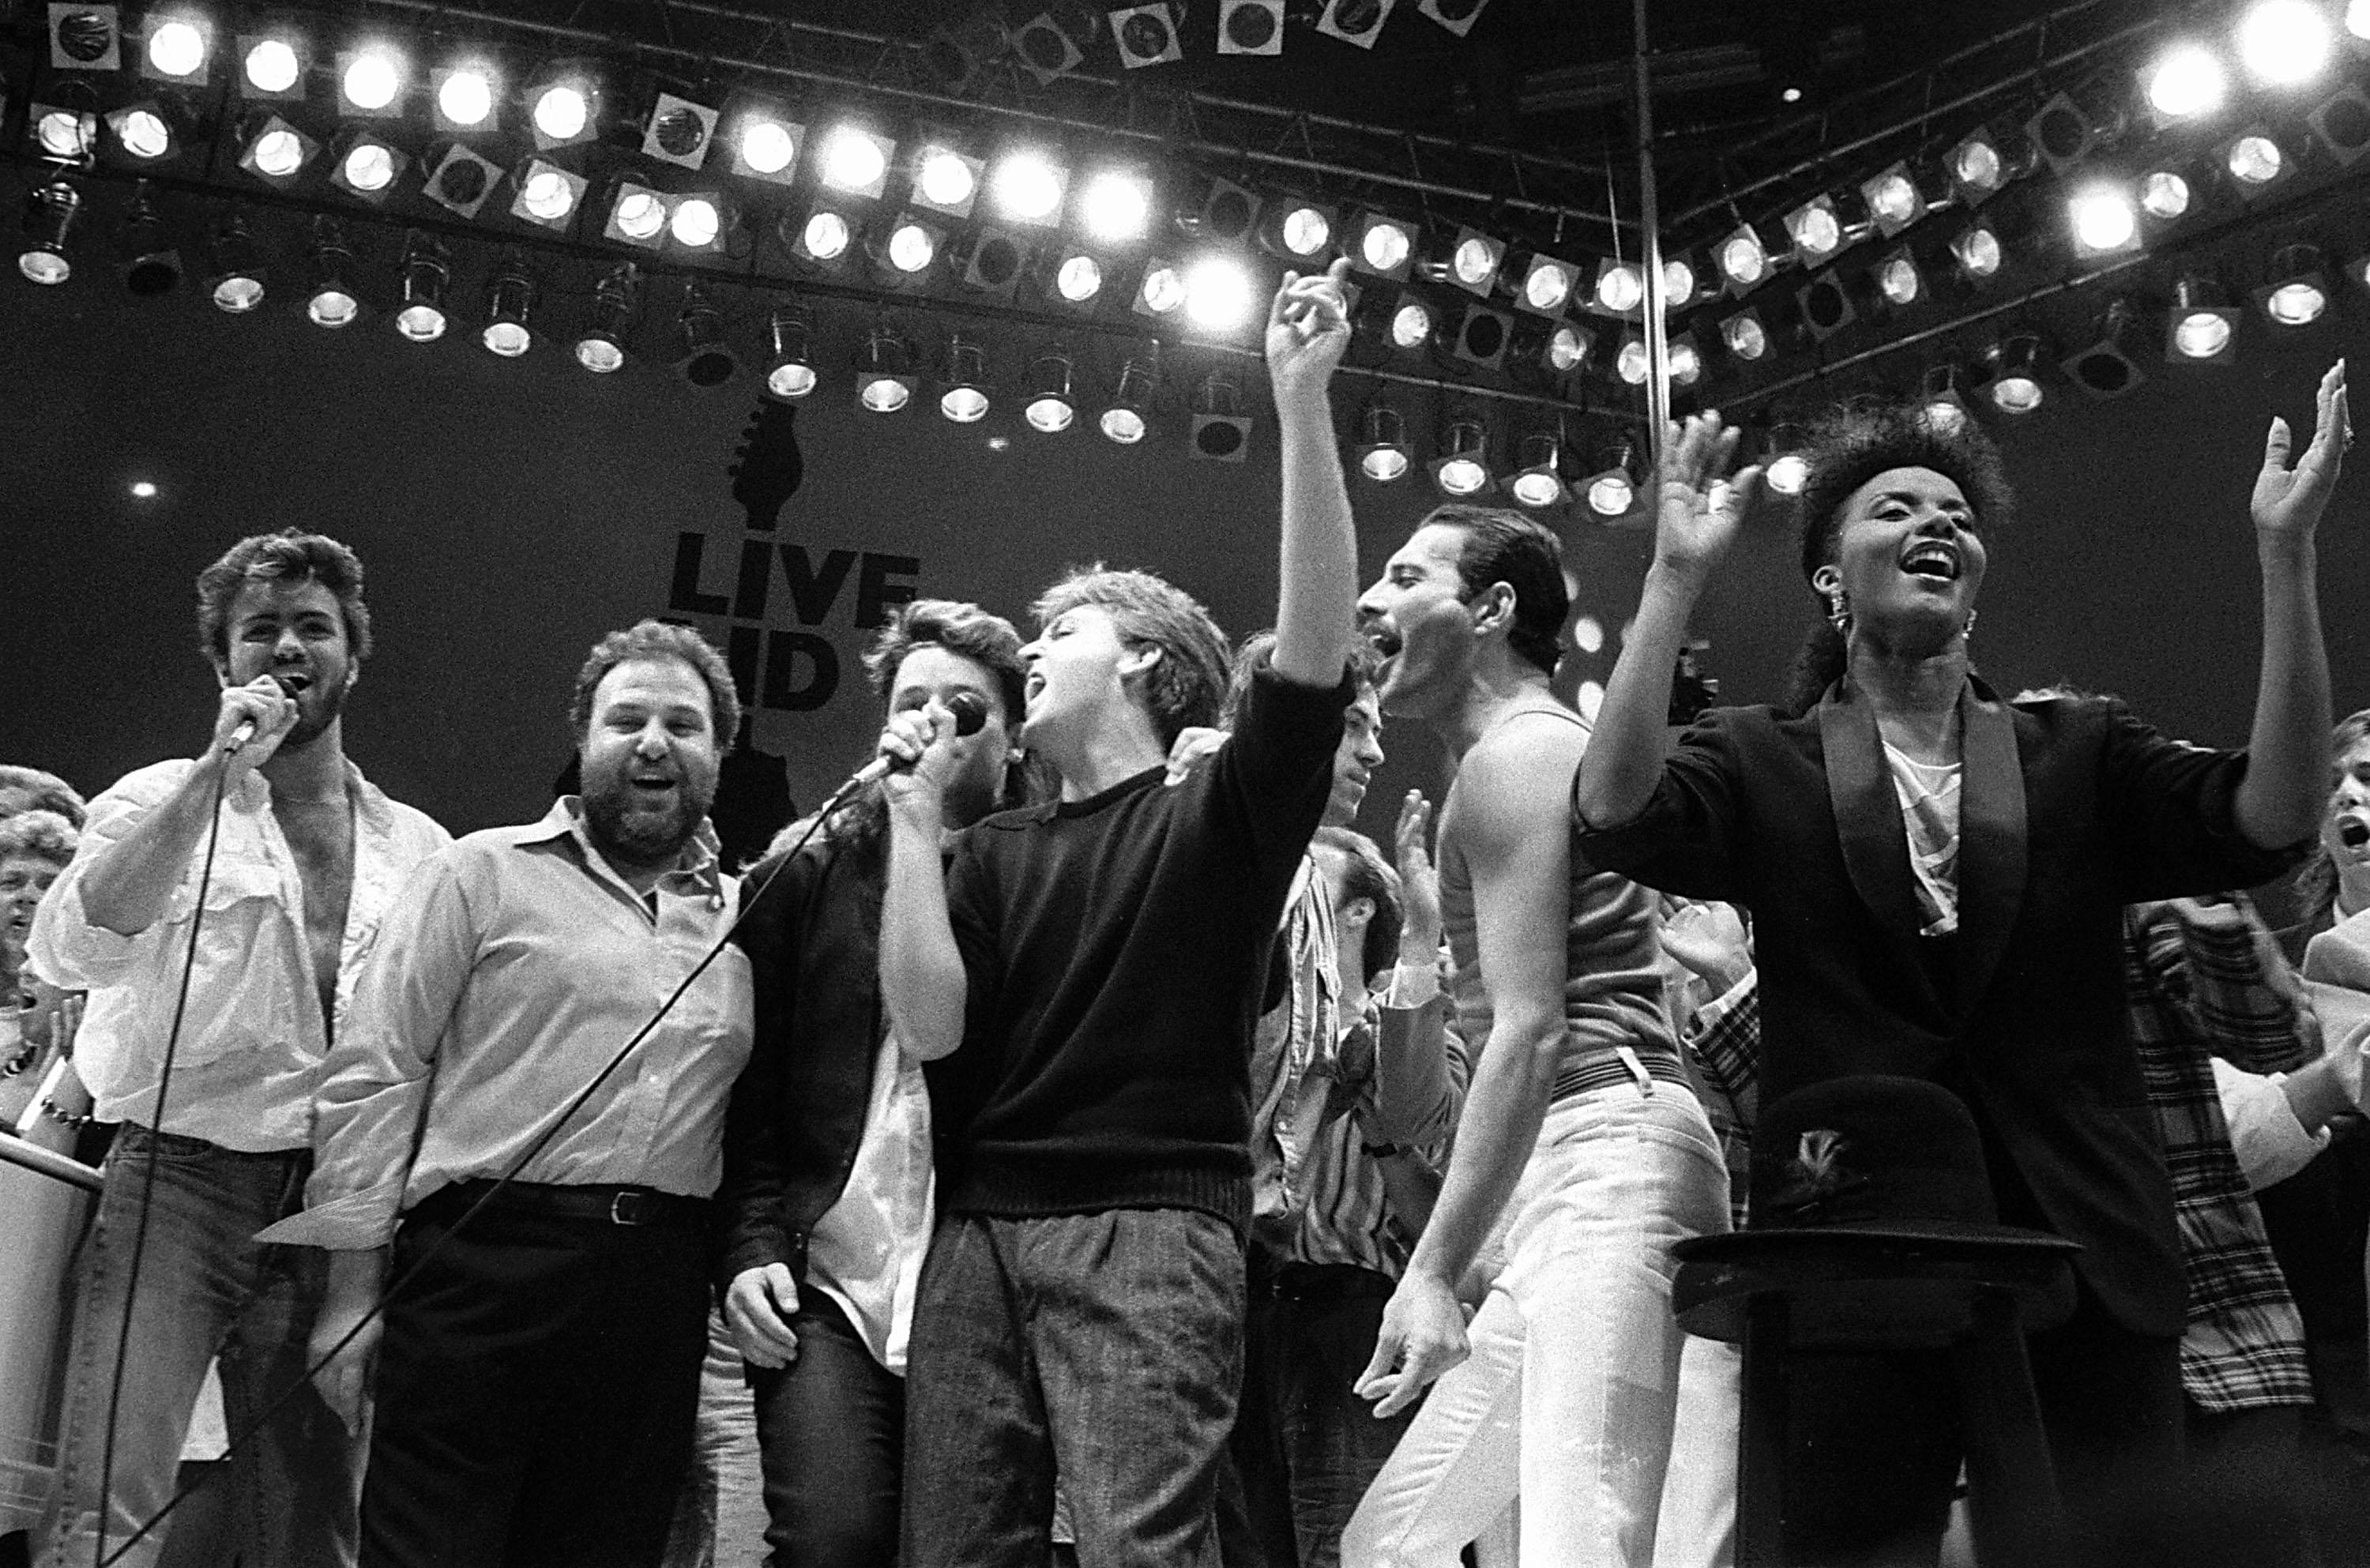 From left, George Michael of Wham!, concert promoter Harvey Goldsmith, Bono of U2, Paul McCartney, concert organiser Bob Geldof and Freddie Mercury of Queen join in the finale of the Live Aid famine relief concert, at Wembley Stadium, London, July 13, 1985. (AP Photo/Joe Schaber)